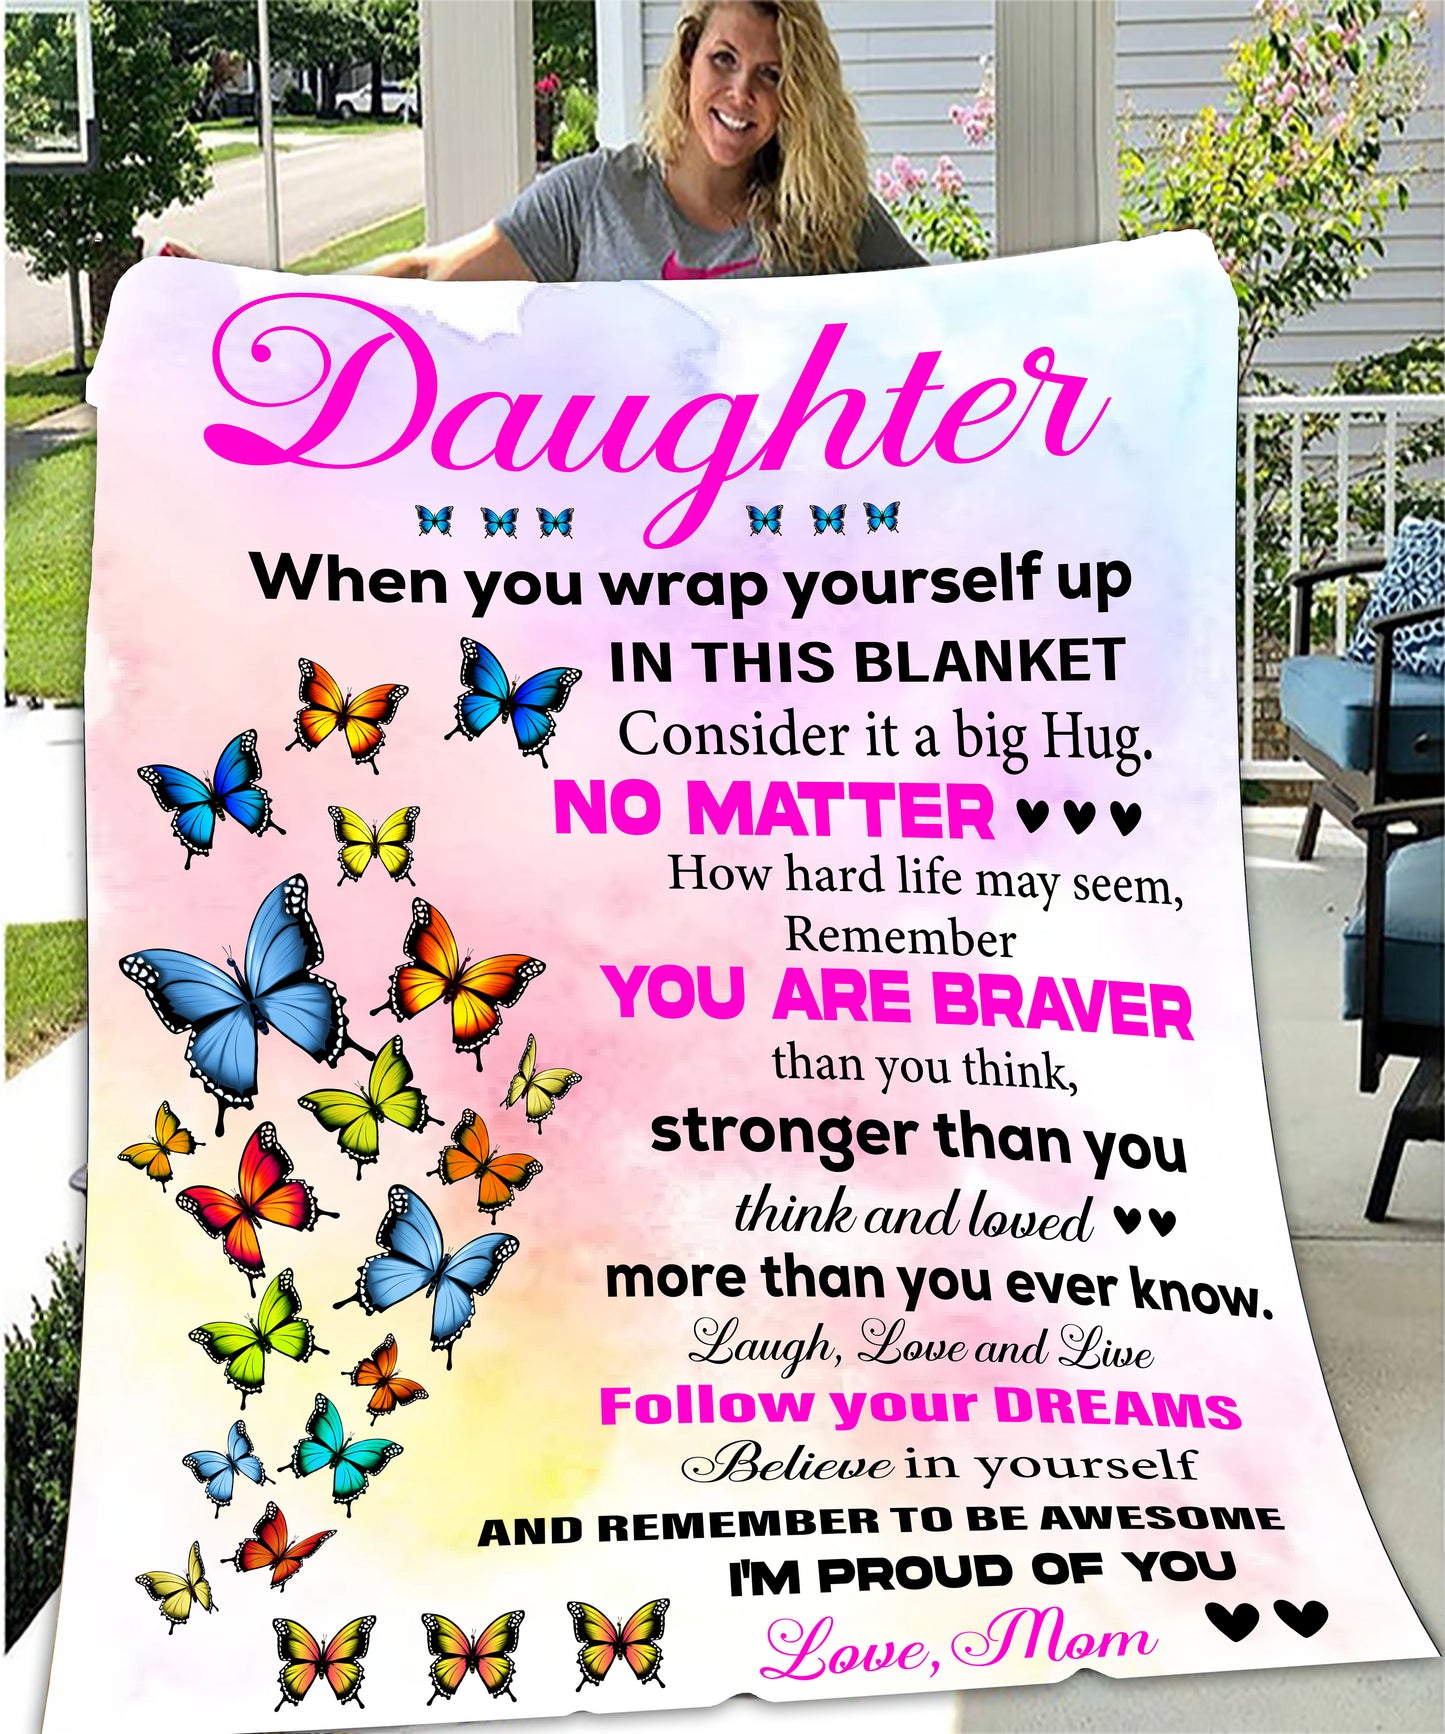 Velveteen Plush Blanket: Dear Daughter you are loved more than you know.